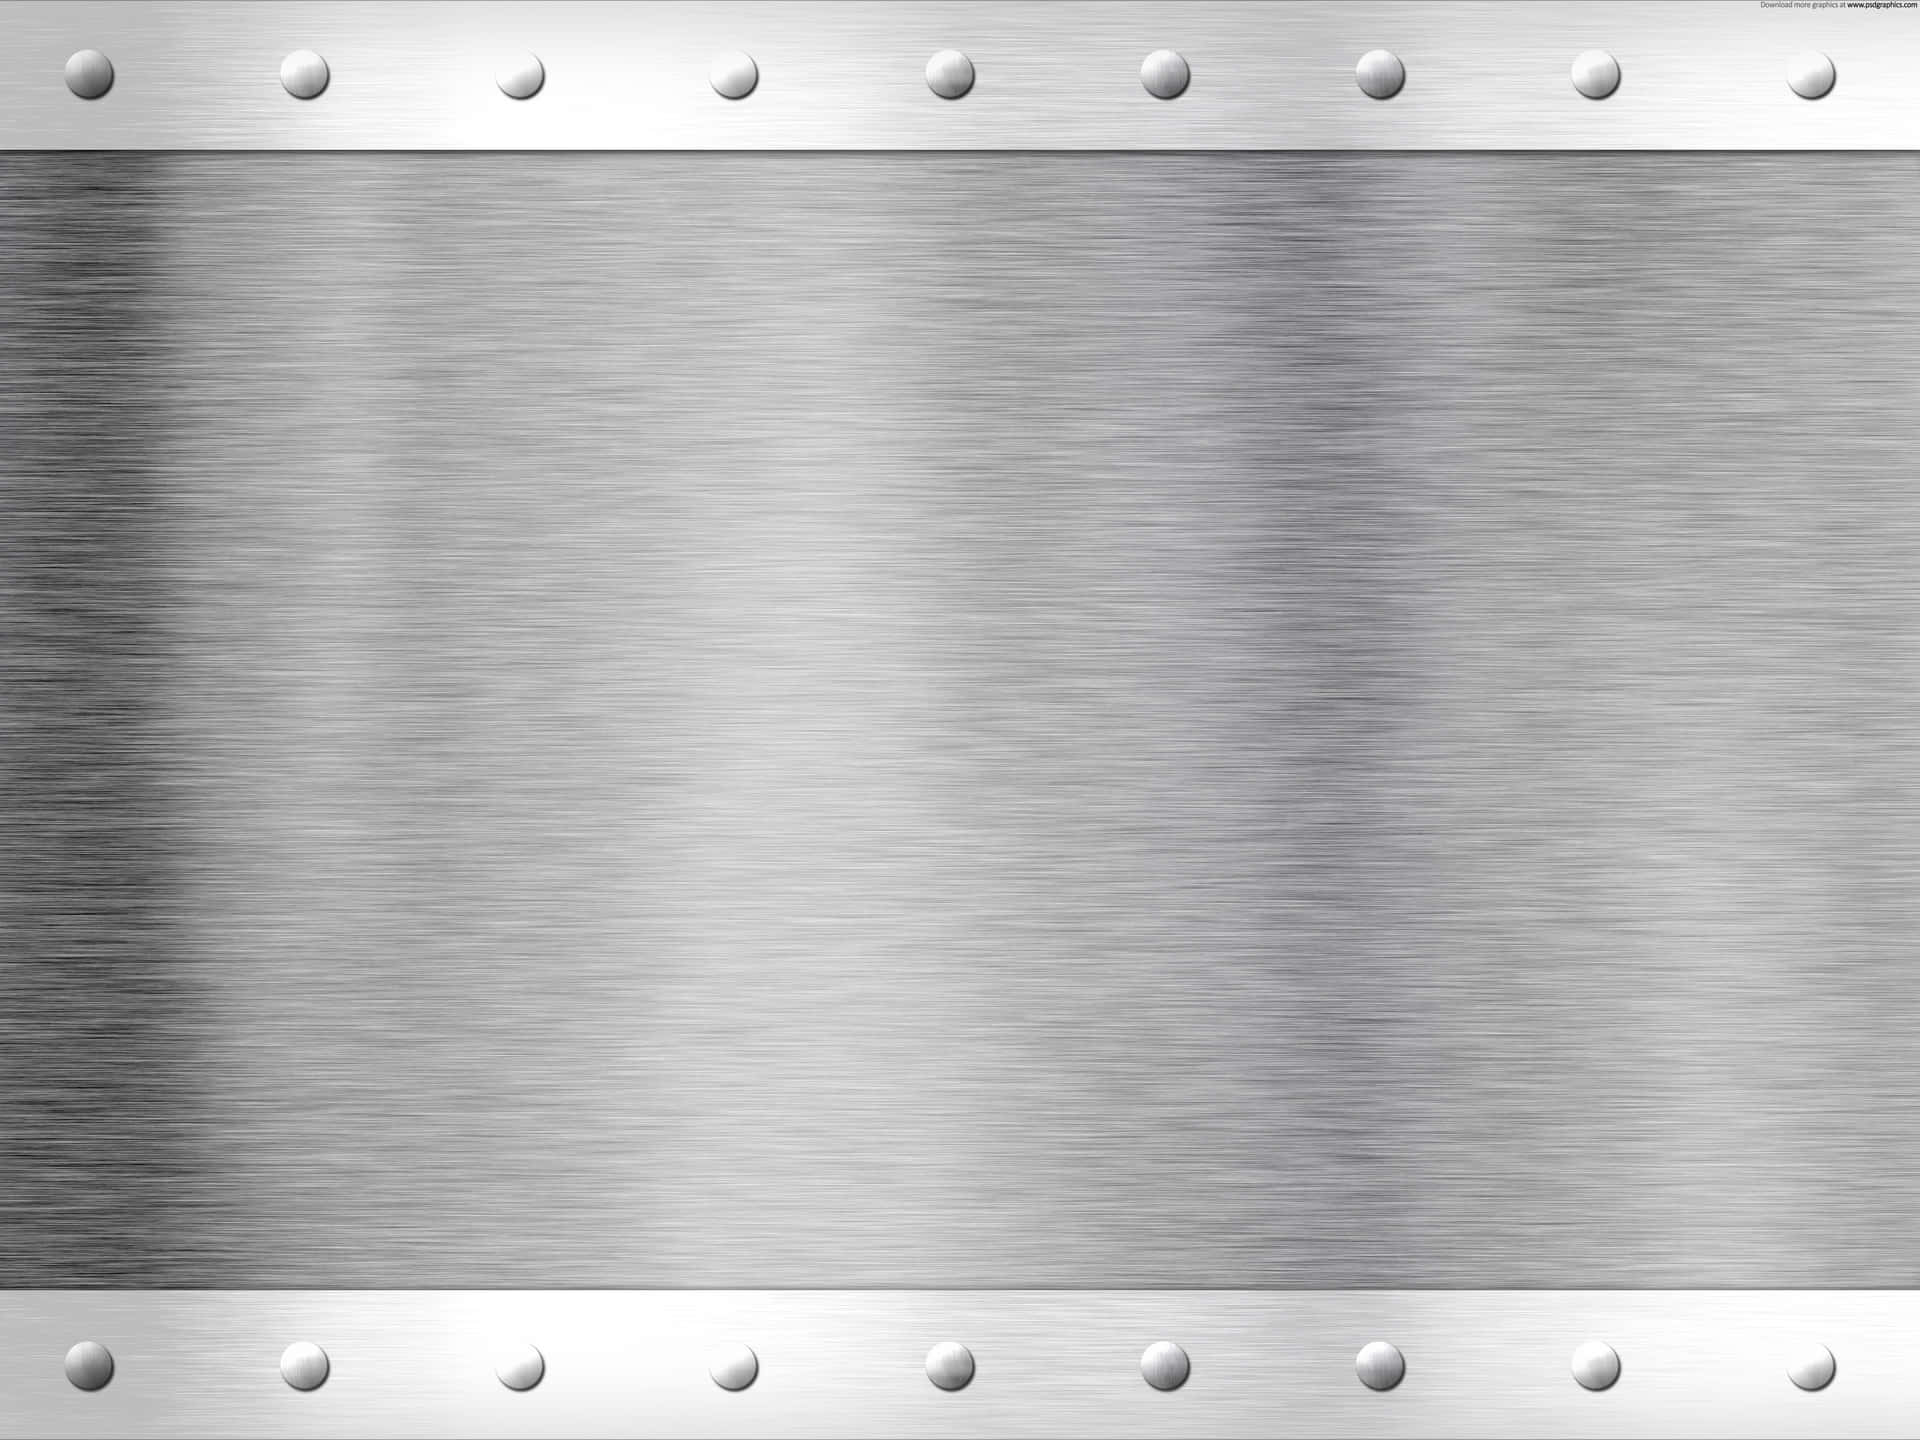 A Metal Plate With Rivets On It